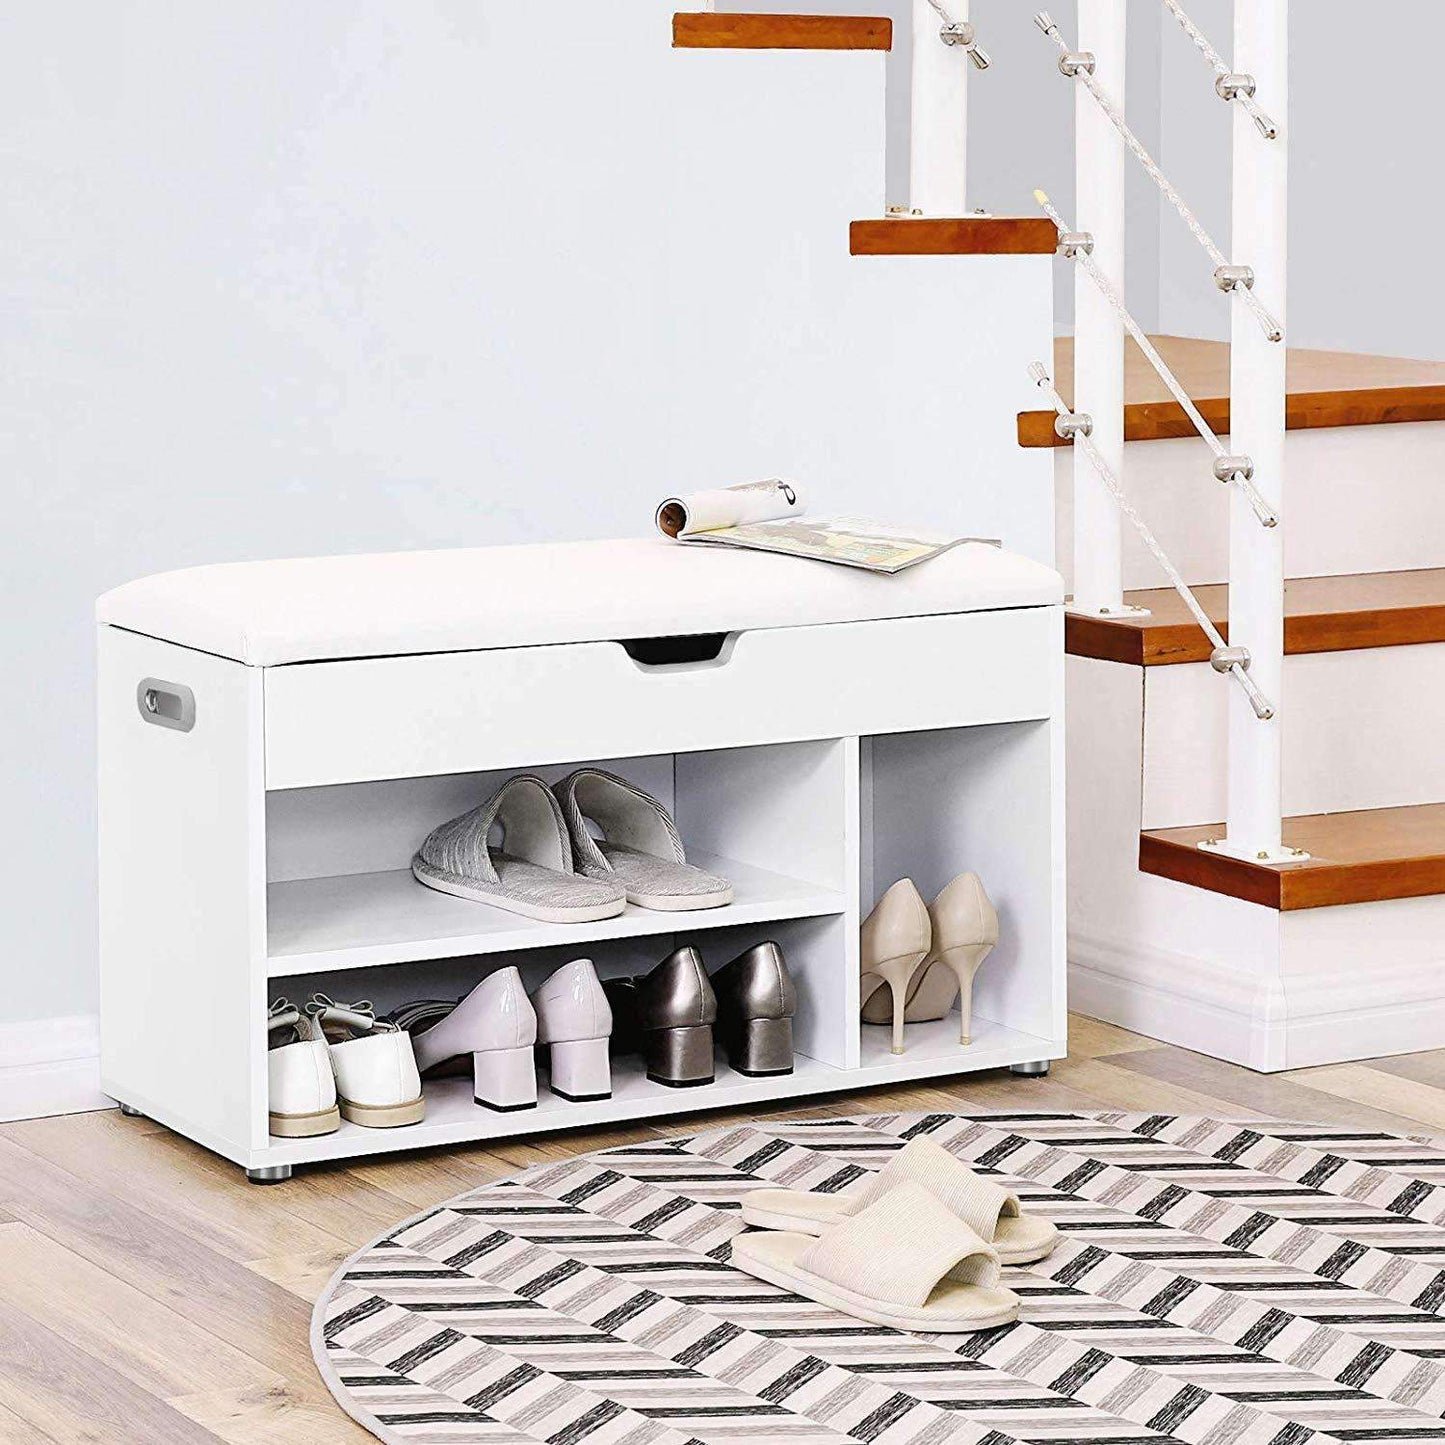 Nancy's Shoe Cabinet White - Multifunctional Cabinet - Wooden Shoe Cabinets with storage space - 80 x 44 x 30 cm (W x H x D)